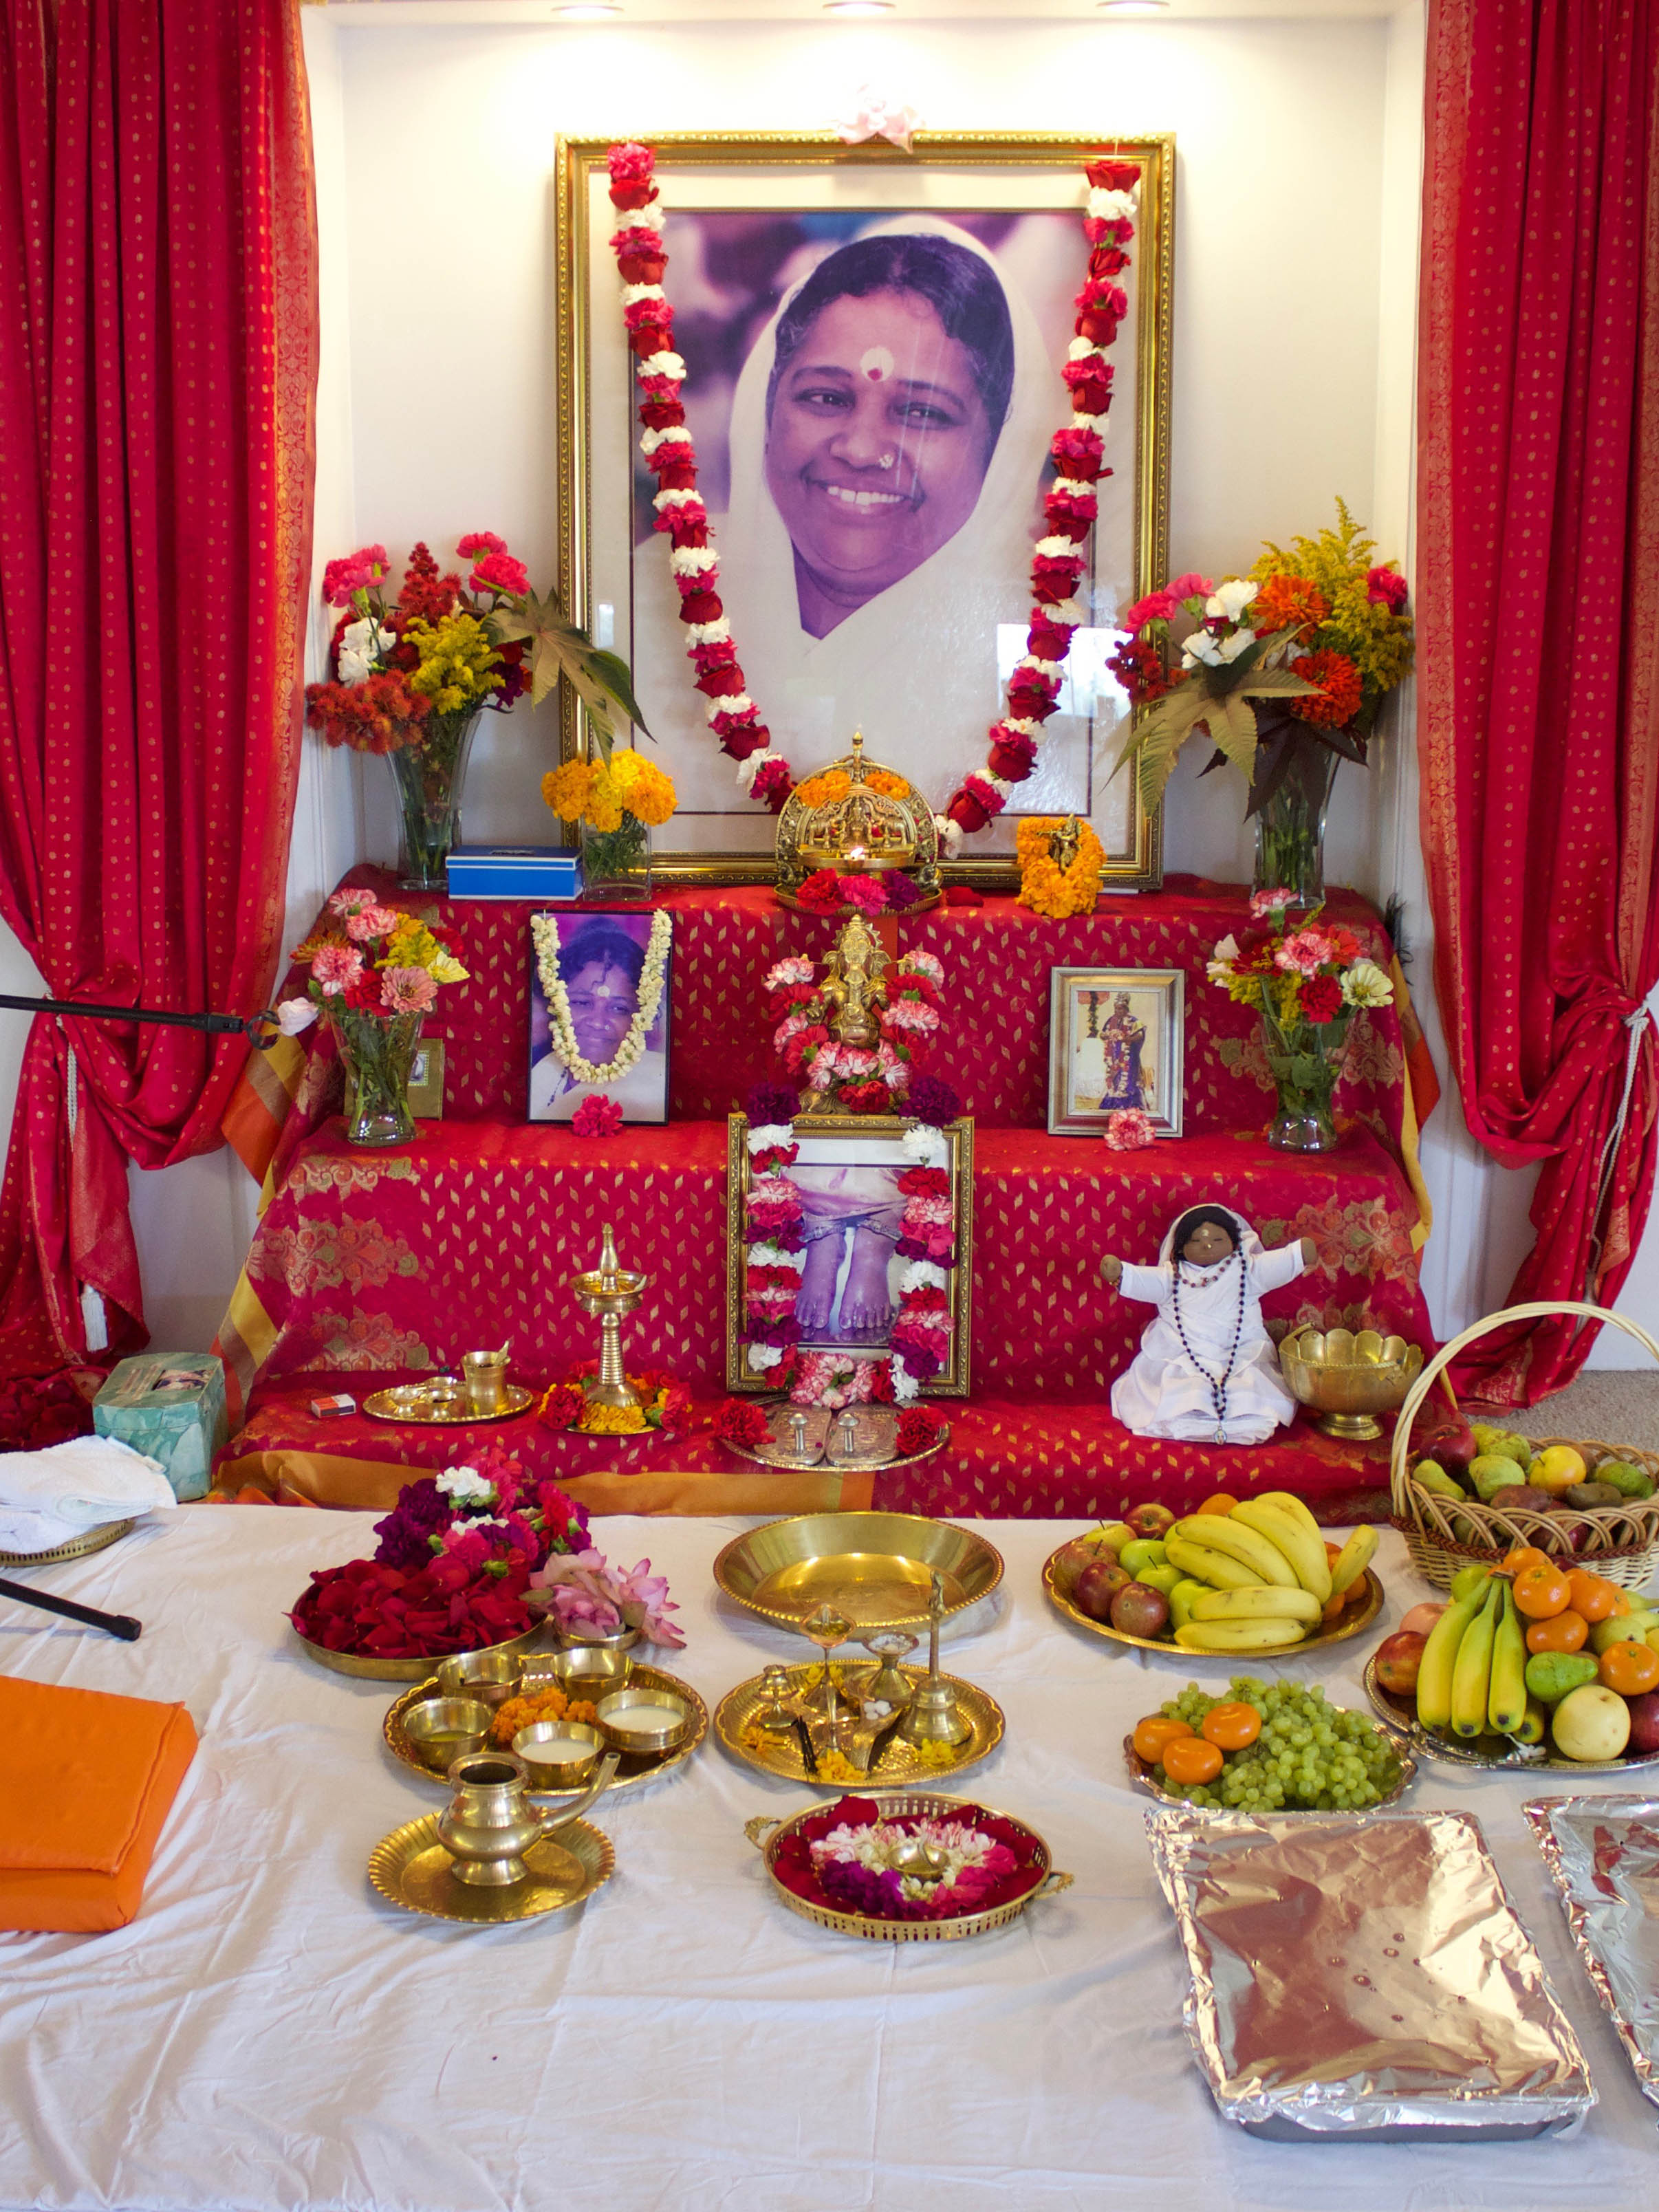 Altar with Amma's picture and garlands of fresh flowers